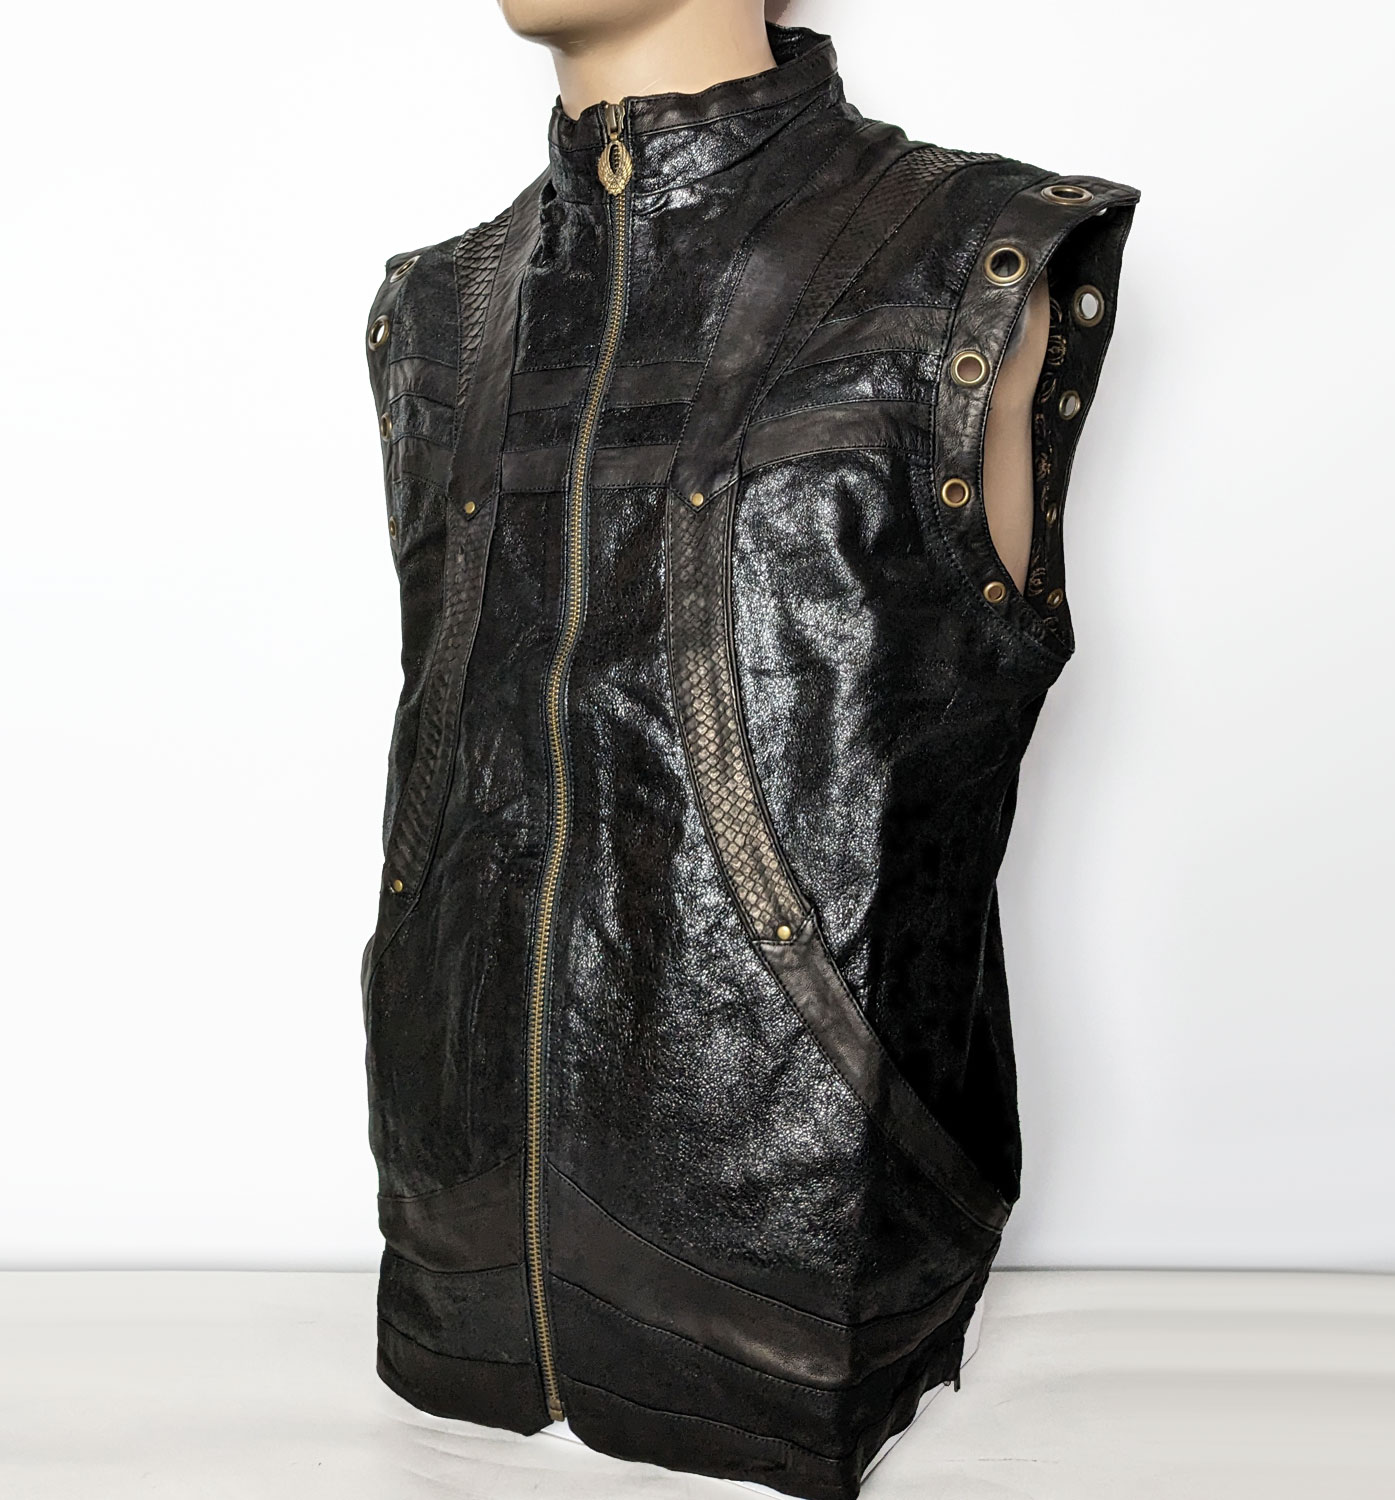 Taurid Leather and Python Vest - anahata designs/infiniti now